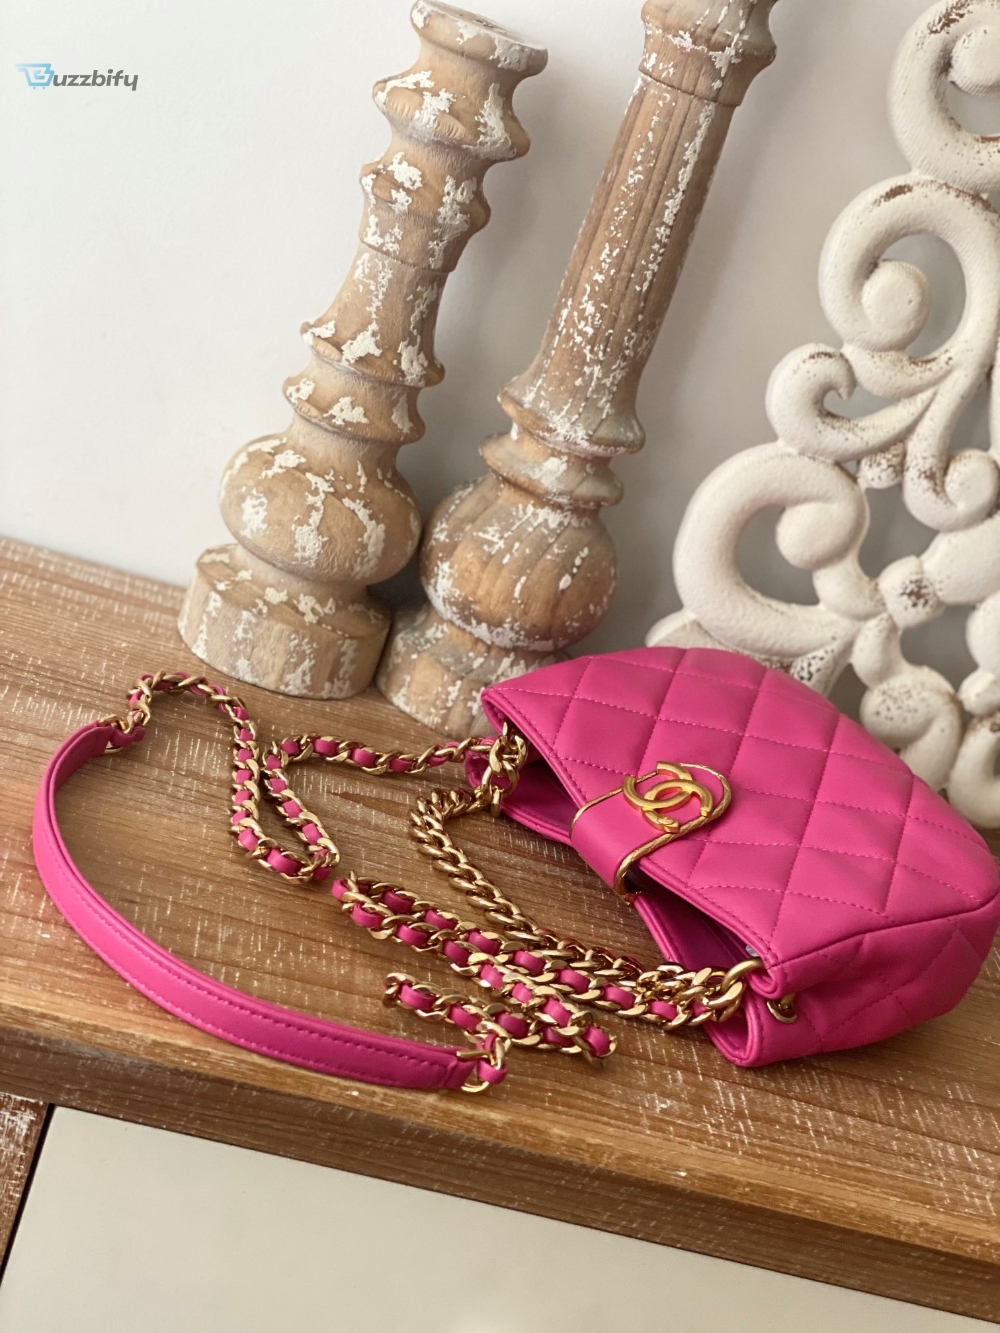 Chanel Small Hobo Bag Gold Hardware Pink For Women Womens Handbags Shoulder Bags 7.5In19cm